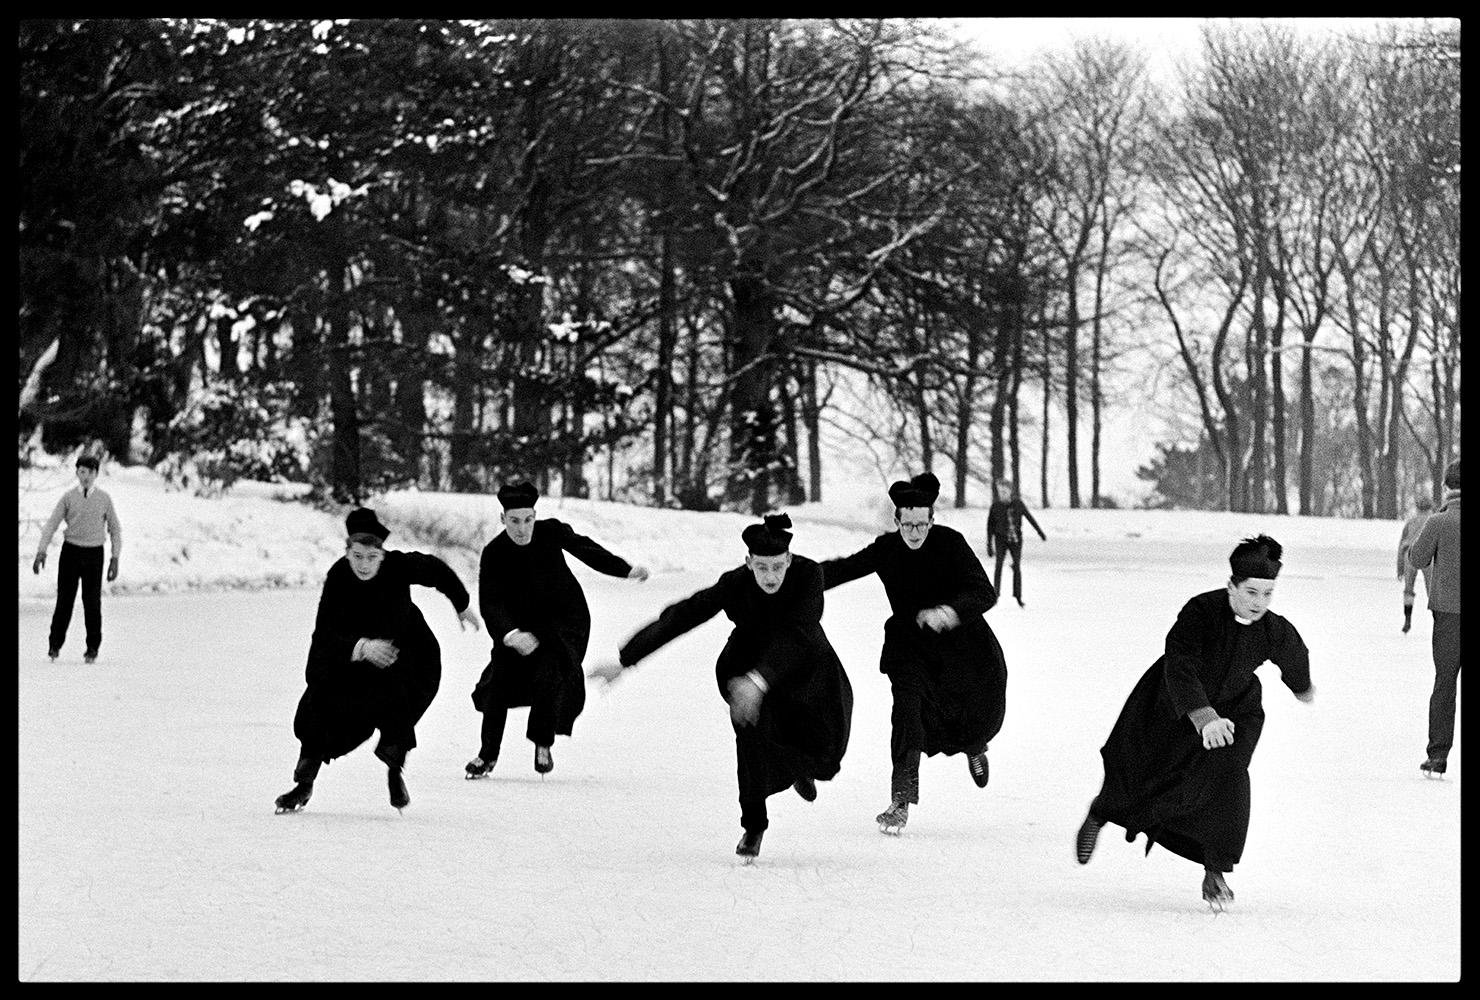 Ice Skating Priests 2

By Arthur Steel 

Paper size: 44 x 33.5" / 112 x 85 cm

Silver Gelatin Print
1960 (printed later)
unframed
hand signed
limited edition of 30

note other print sizes and framing options are available, please enquire for